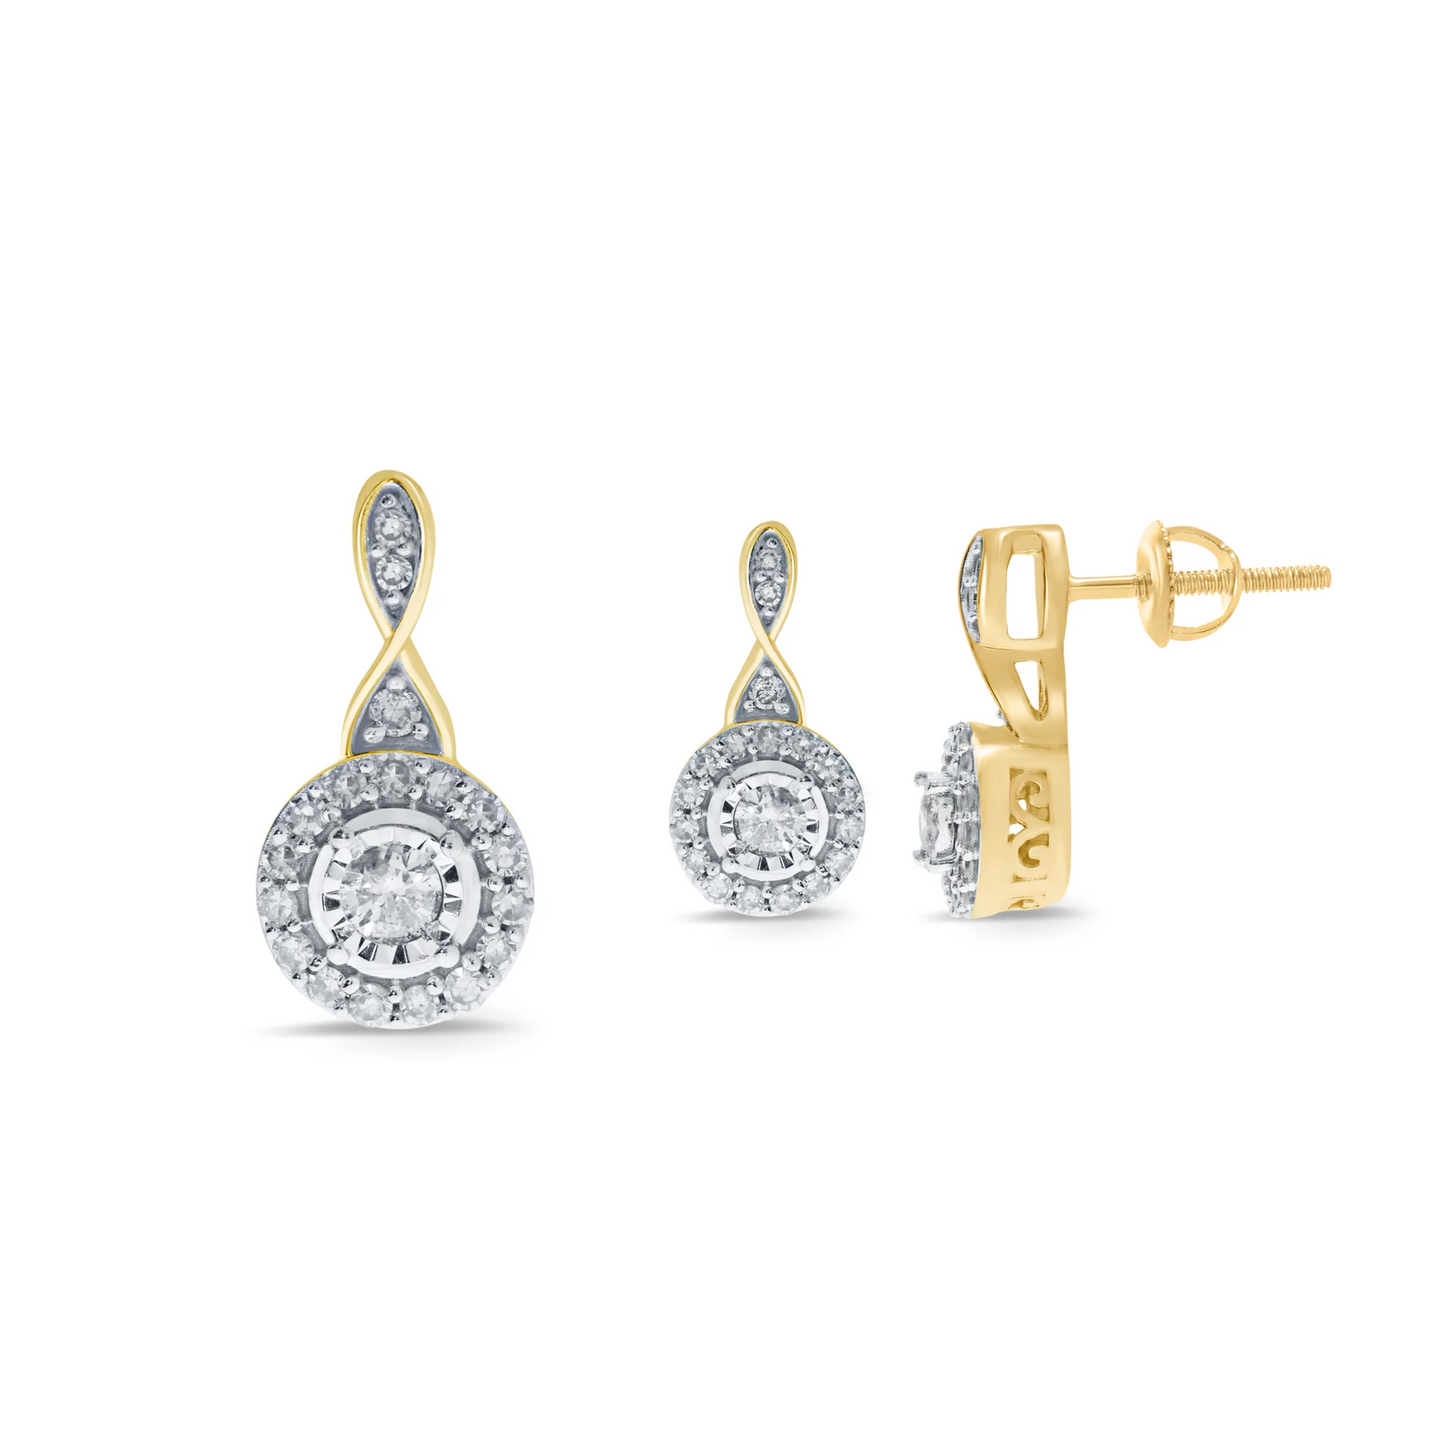 10K YELLOW GOLD .60 CARAT REAL DIAMOND EARRINGS & PENDANT NECKLACE SET WITH YELLOW GOLD CHAIN / SKU SET00051-YG